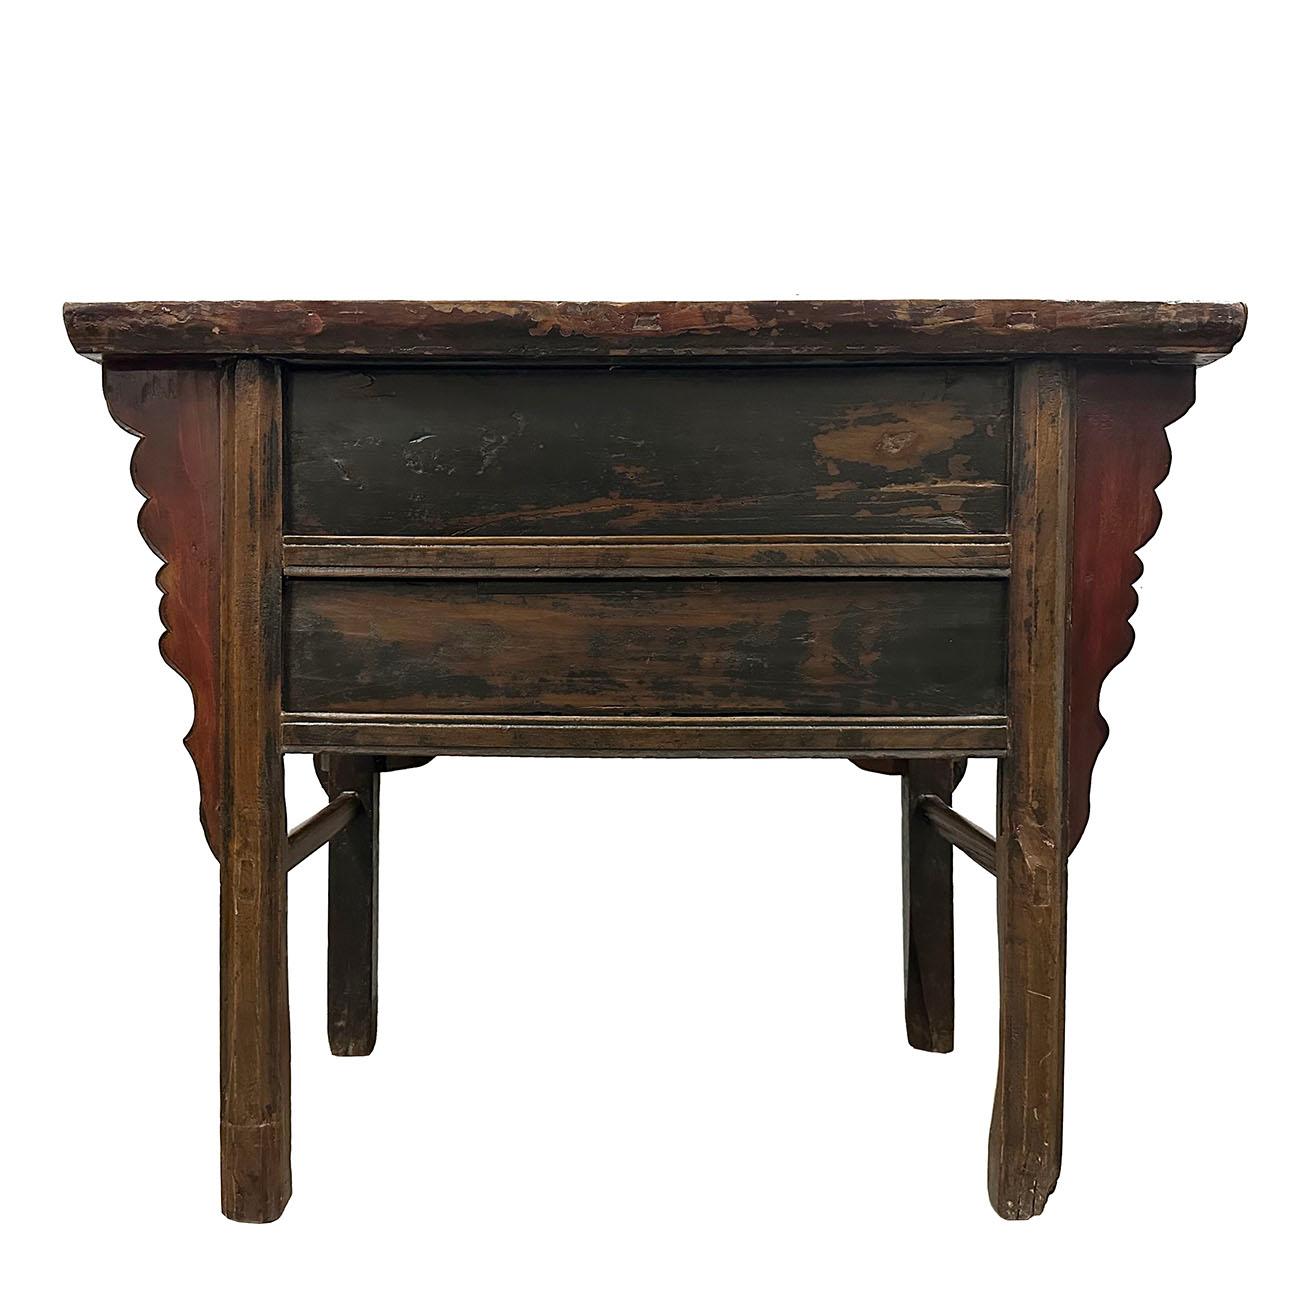 19 Century Antique Chinese Carved Shan Xi Console Table/Sideboard For Sale 4